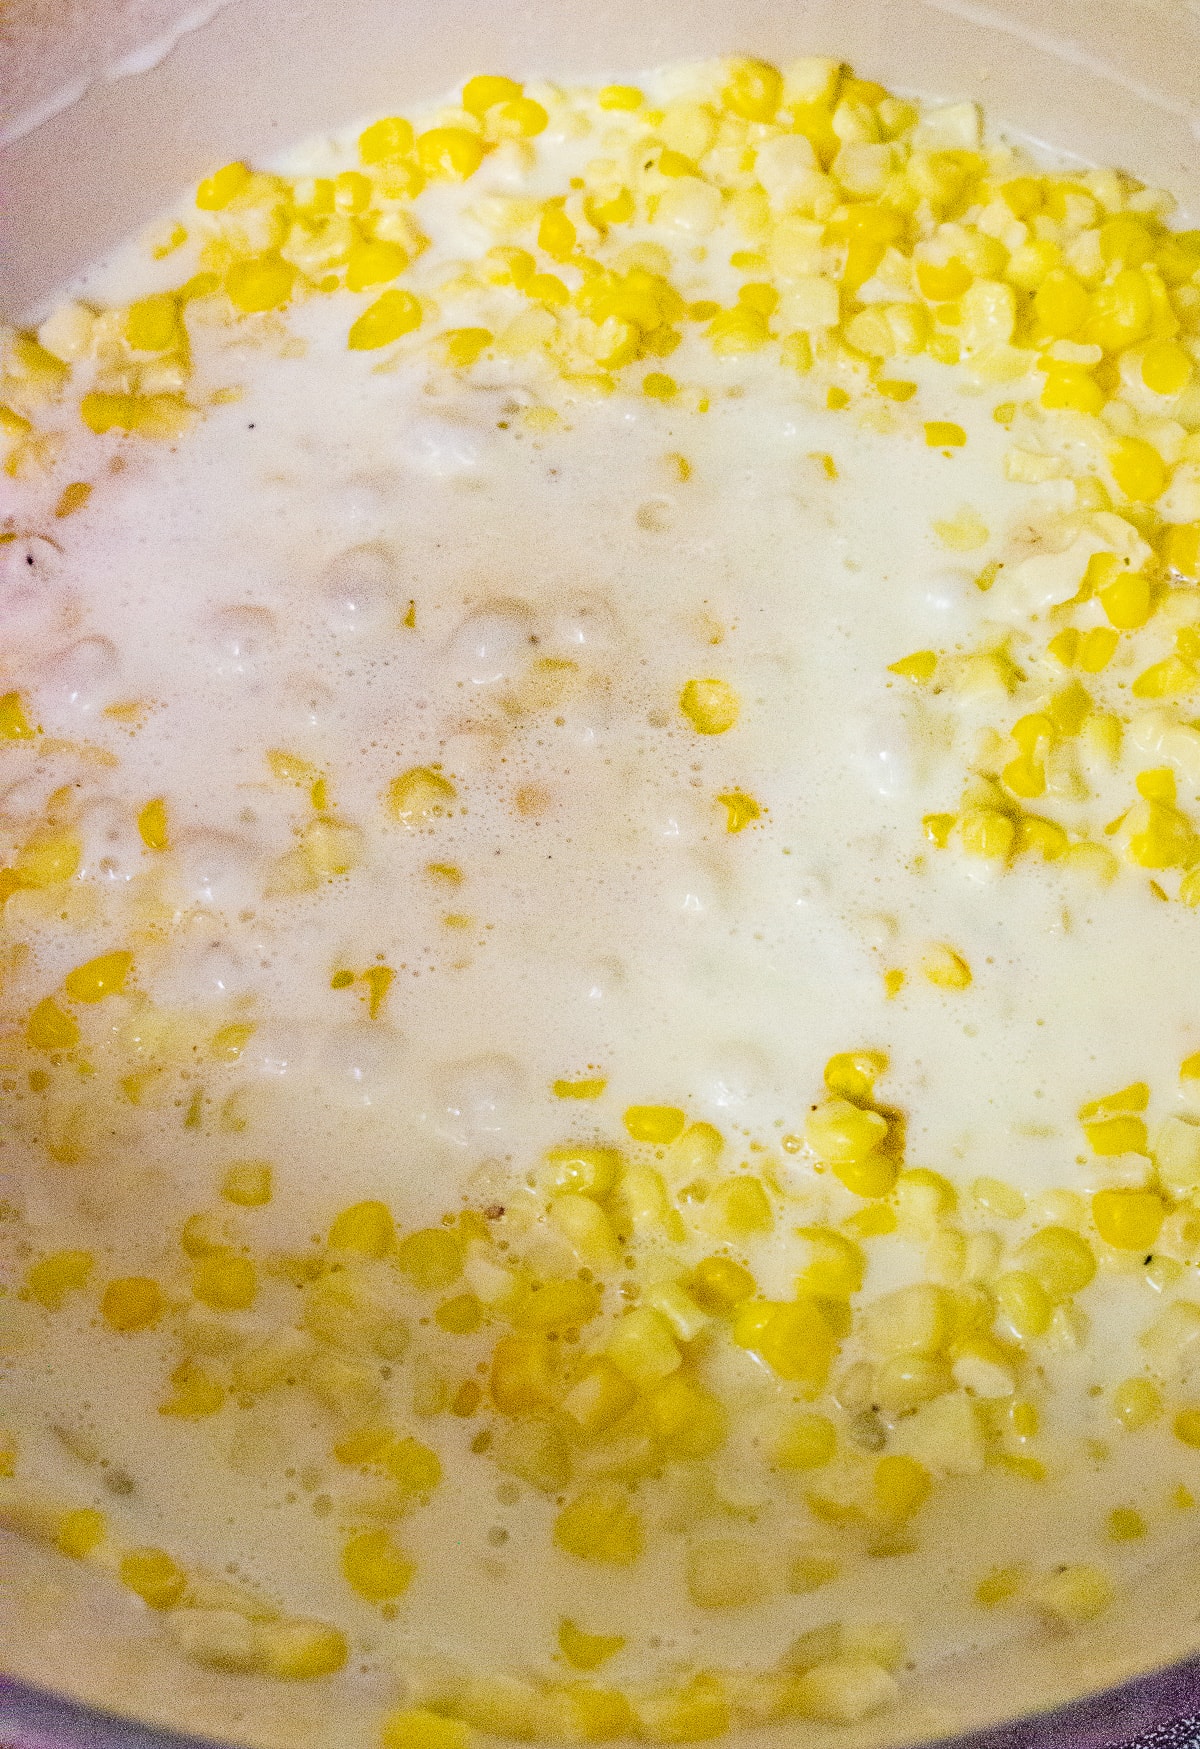 a pot of cream, cheese, and corn kernels cooking .